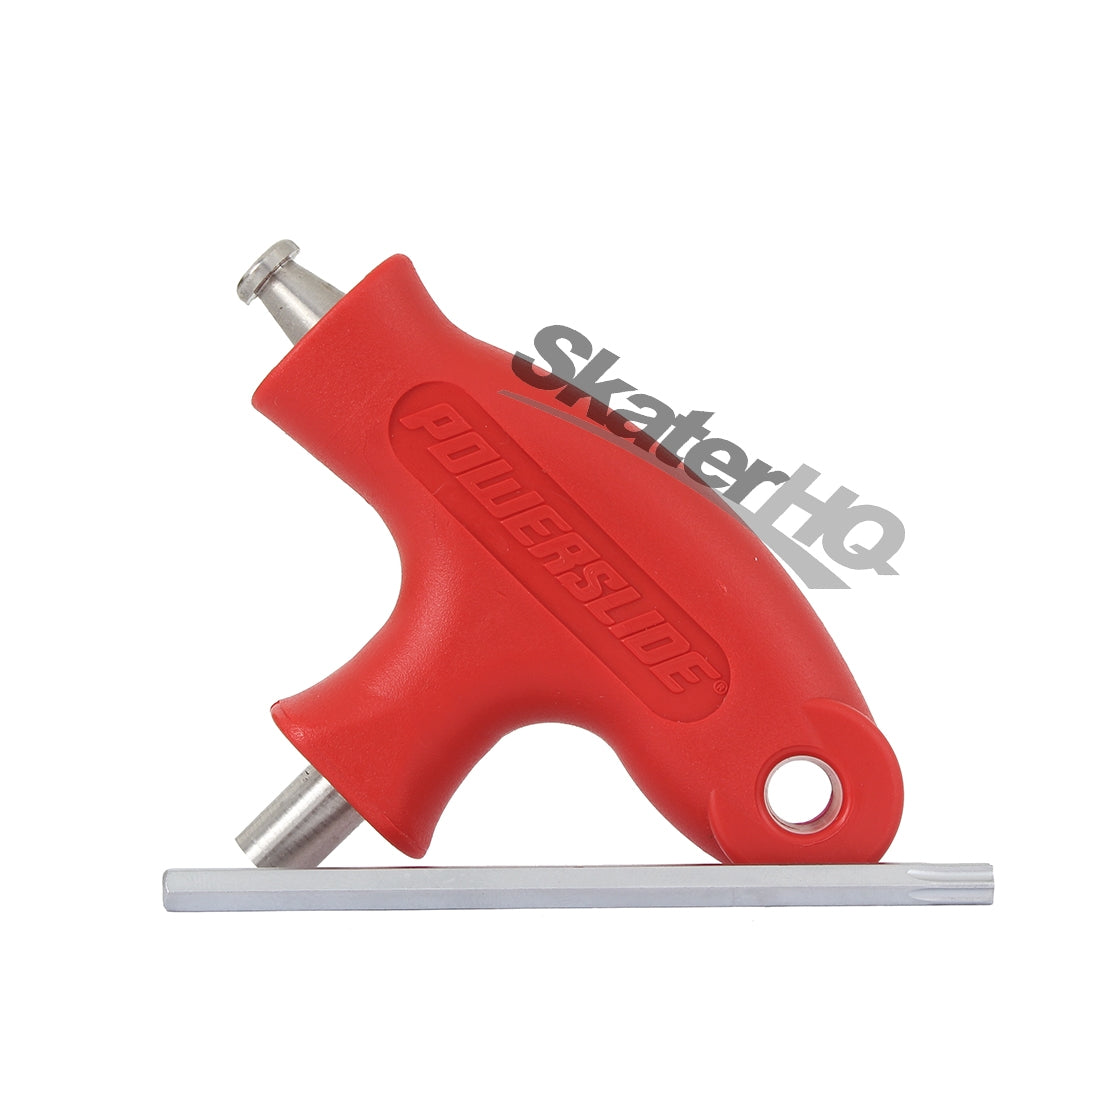 Powerslide Torx/Hex Tool - Red Inline Aggressive Accessories